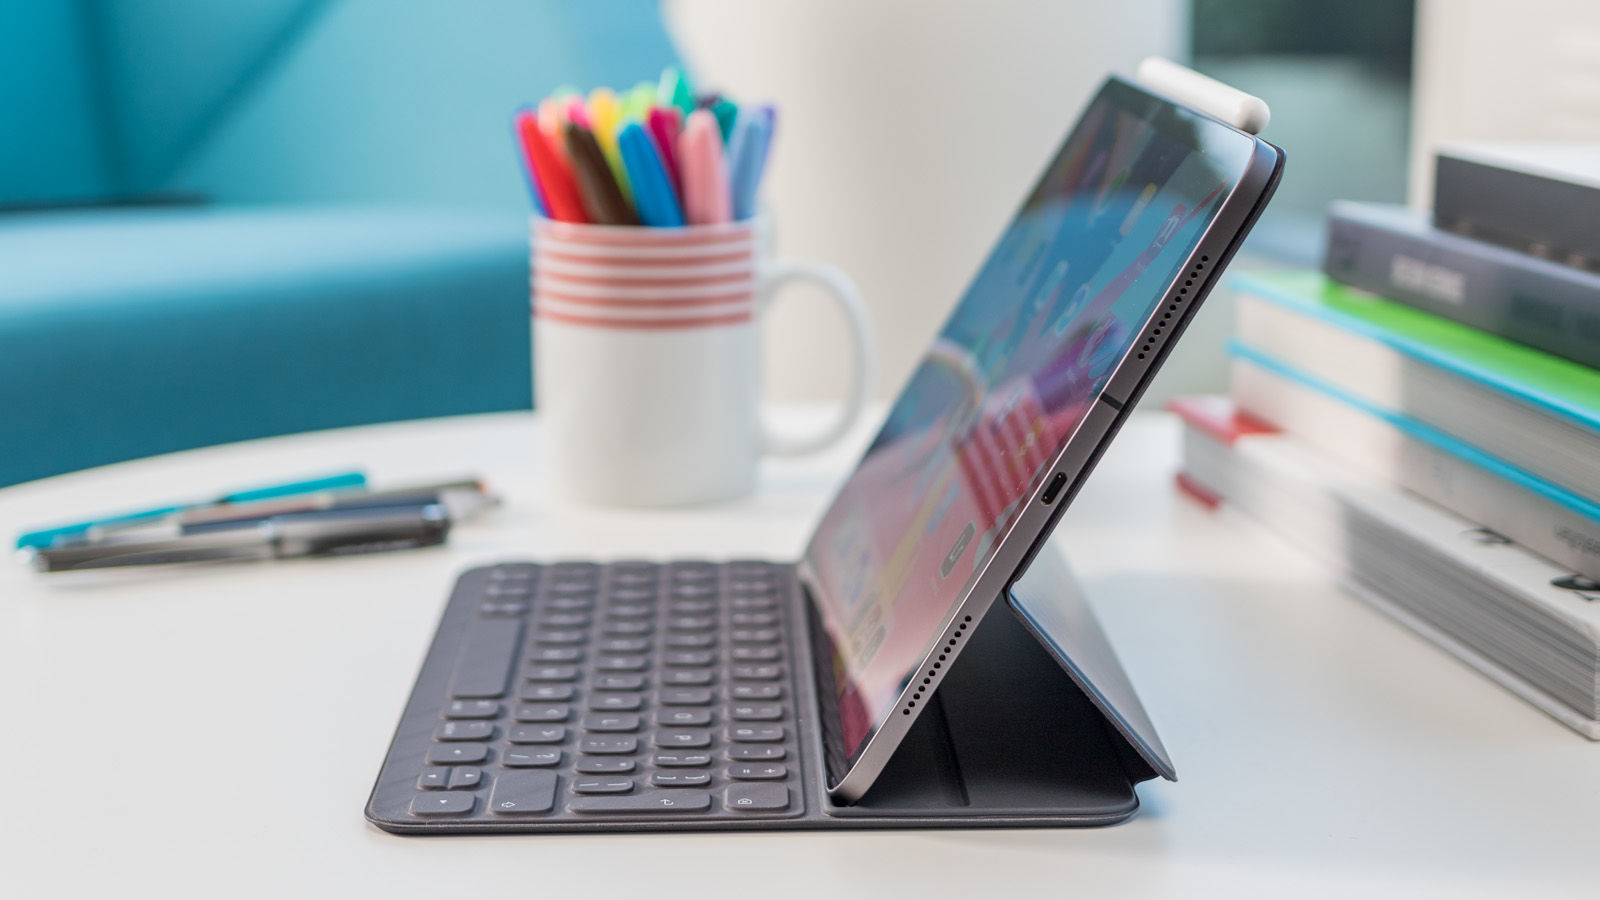 Apple iPad Pro 2020 Features, Specs Smart Keyboard with Trackpad will be the New Accessory